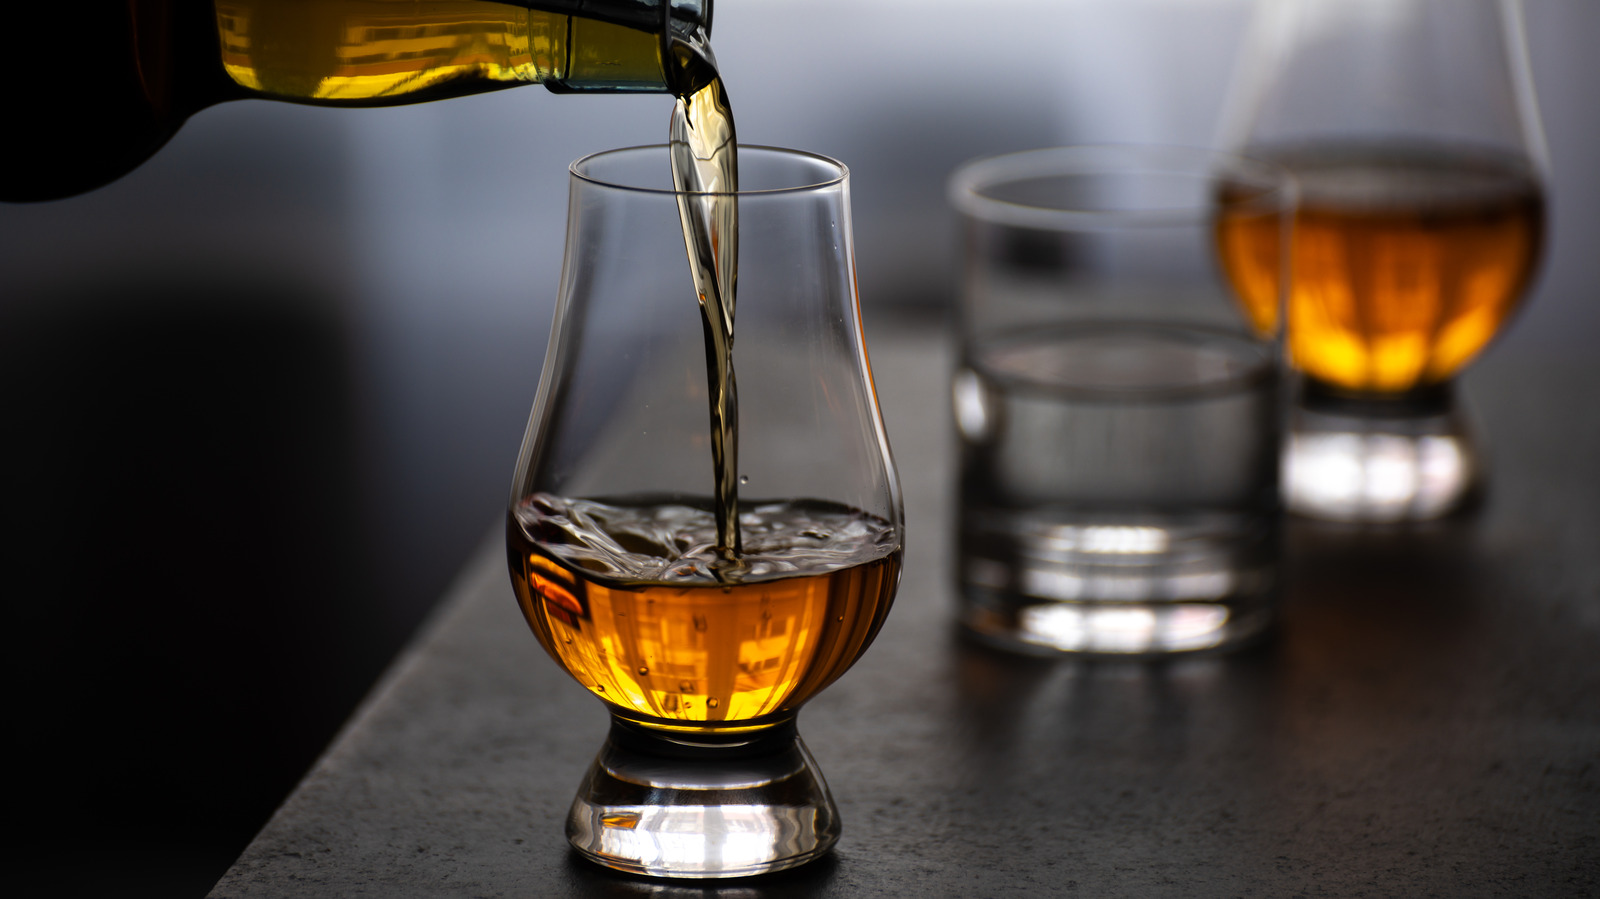 https://www.thedailymeal.com/img/gallery/the-real-reason-whiskey-glasses-are-shaped-like-tulips/l-intro-1664982416.jpg